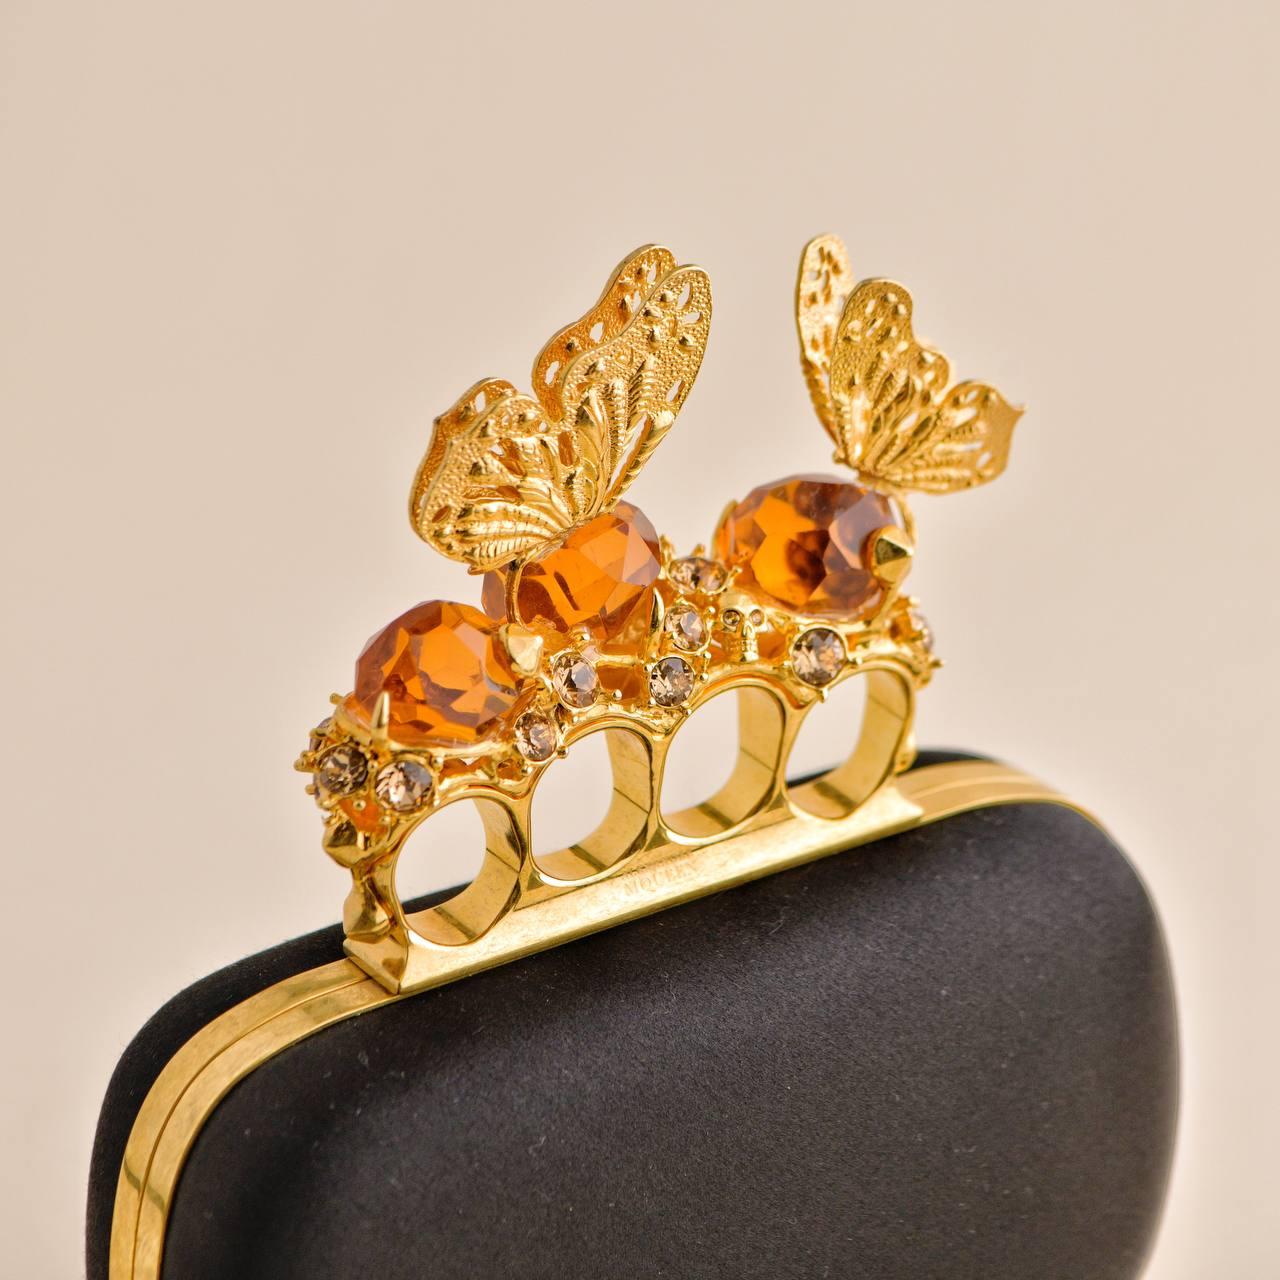 Alexander McQueen Butterfly Knuckle-Duster Box Clutch Bag For Sale 3